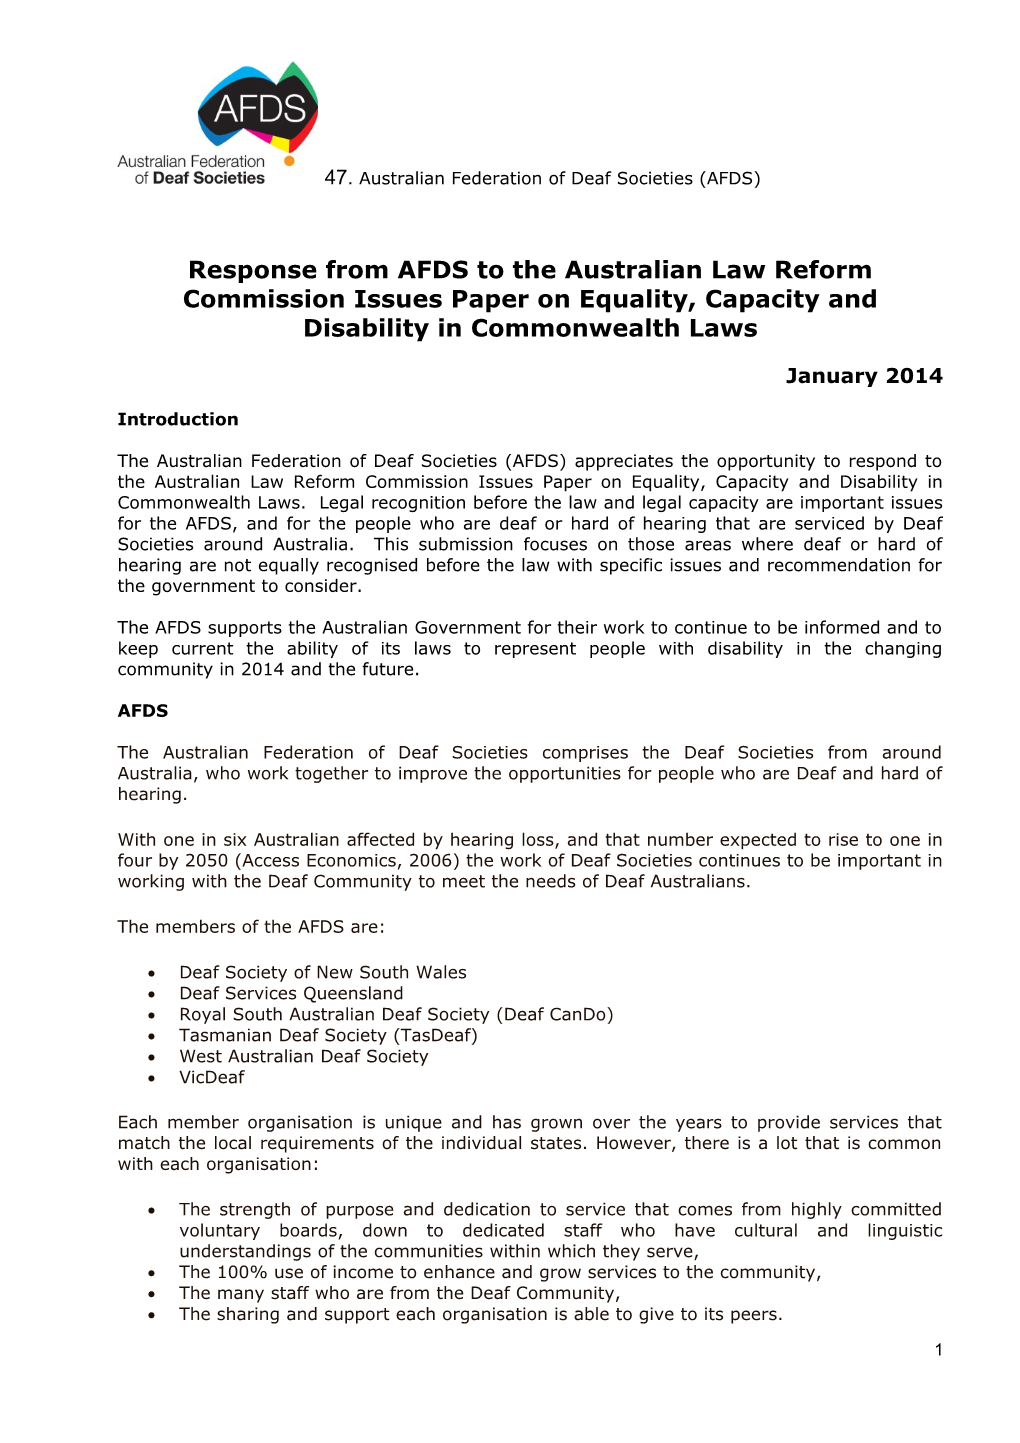 Response from AFDS to the Australian Law Reform Commission Issues Paper on Equality, Capacity